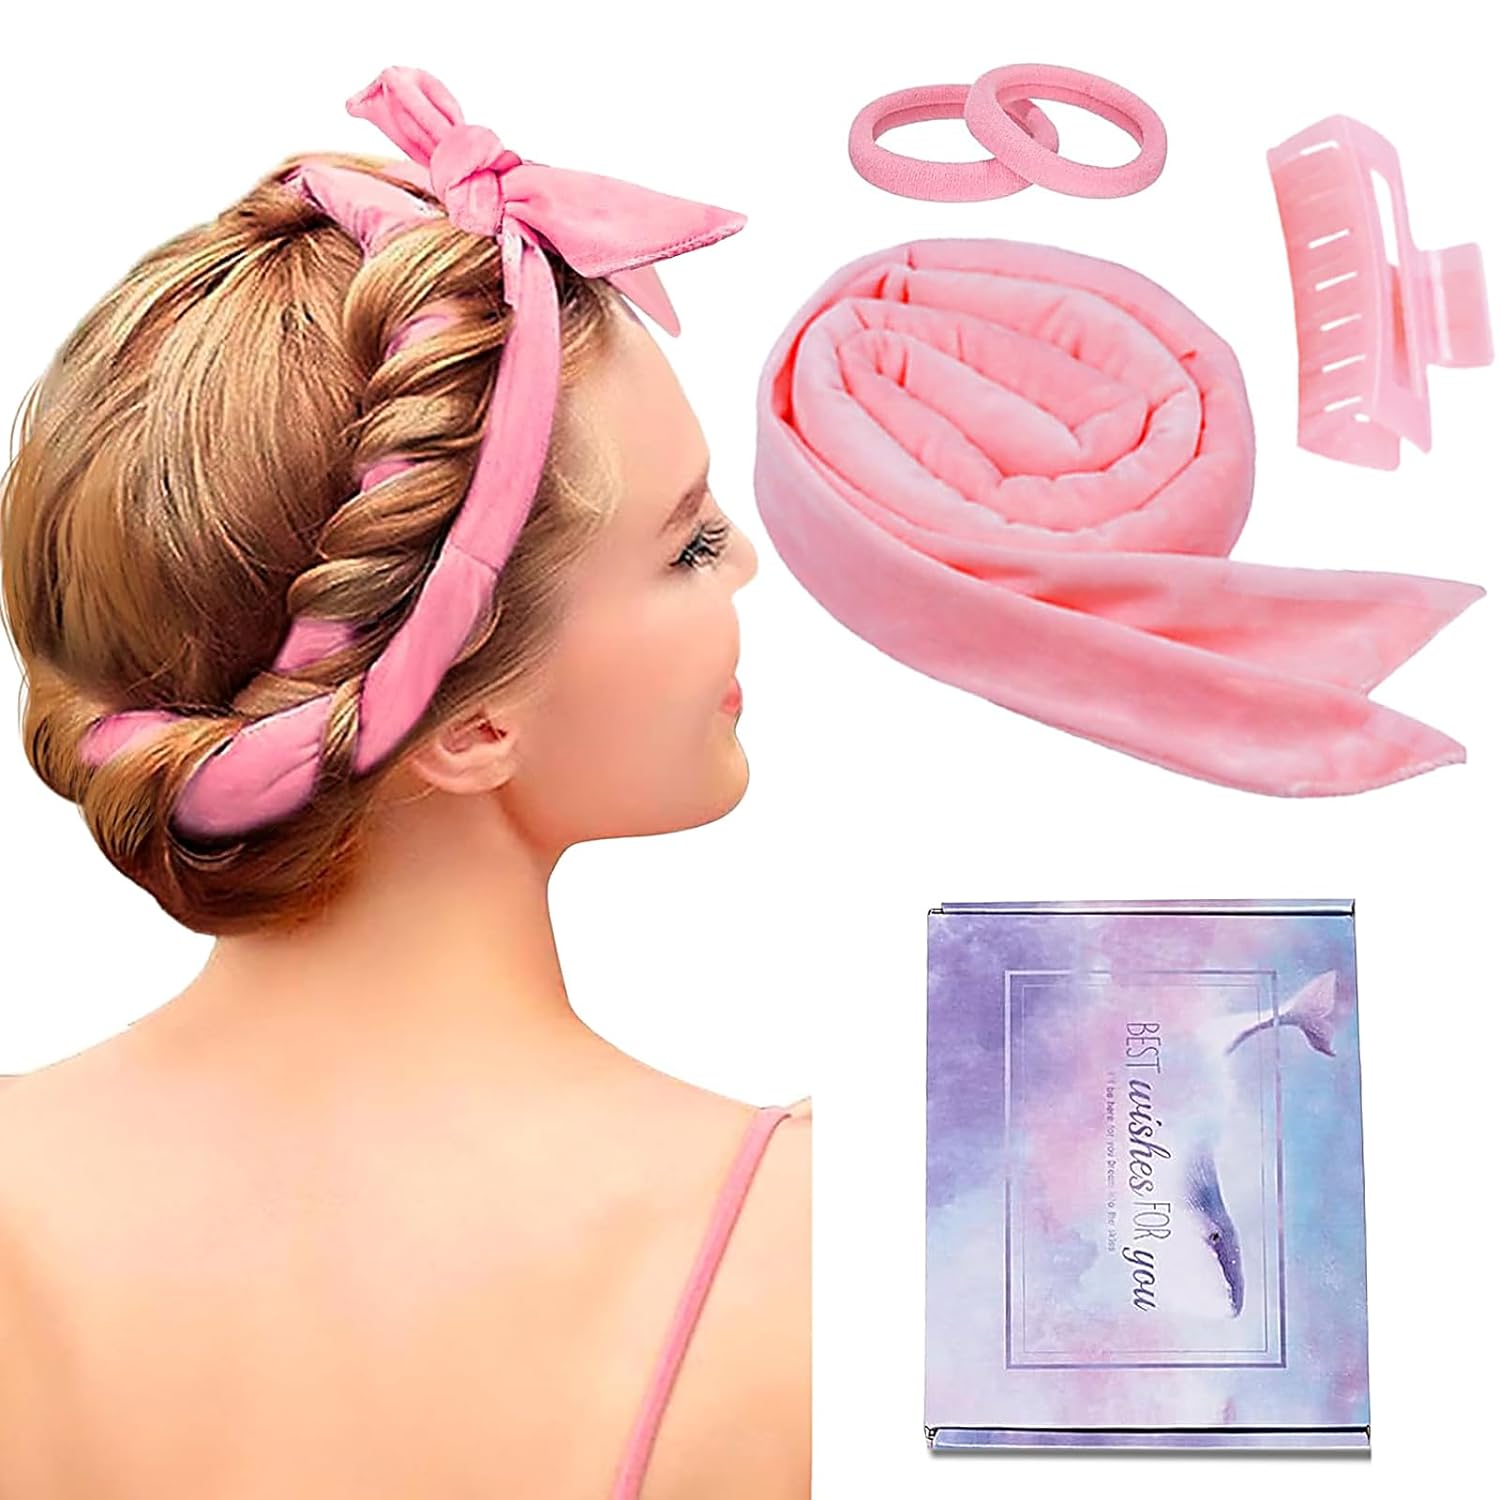 Curler Without Heat, Non-Slip Heatless Velvet Hair Curls Band Overnight with Hairpin, DIY Hair Curler Curling Band, Hairstyle Set for Medium Long Hair, Pink
